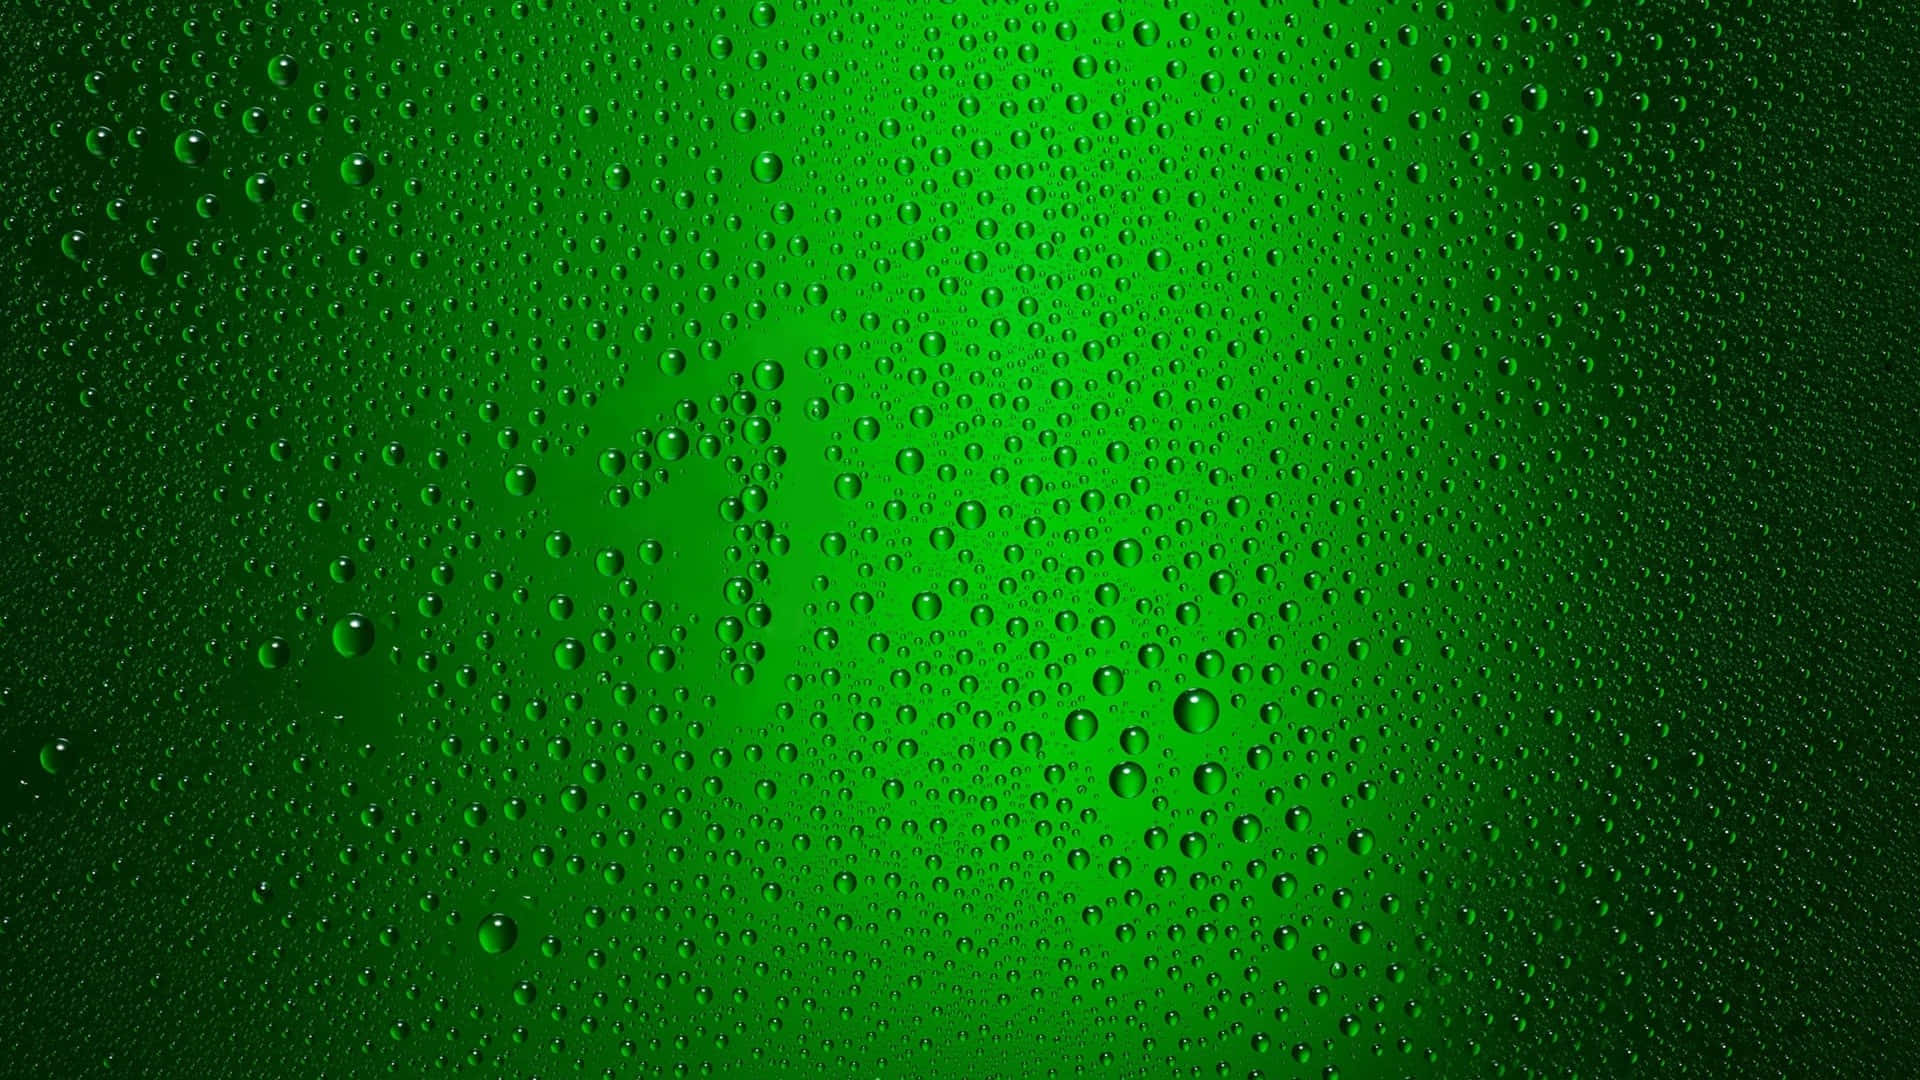 Green Beer Bottle With Water Droplets On It